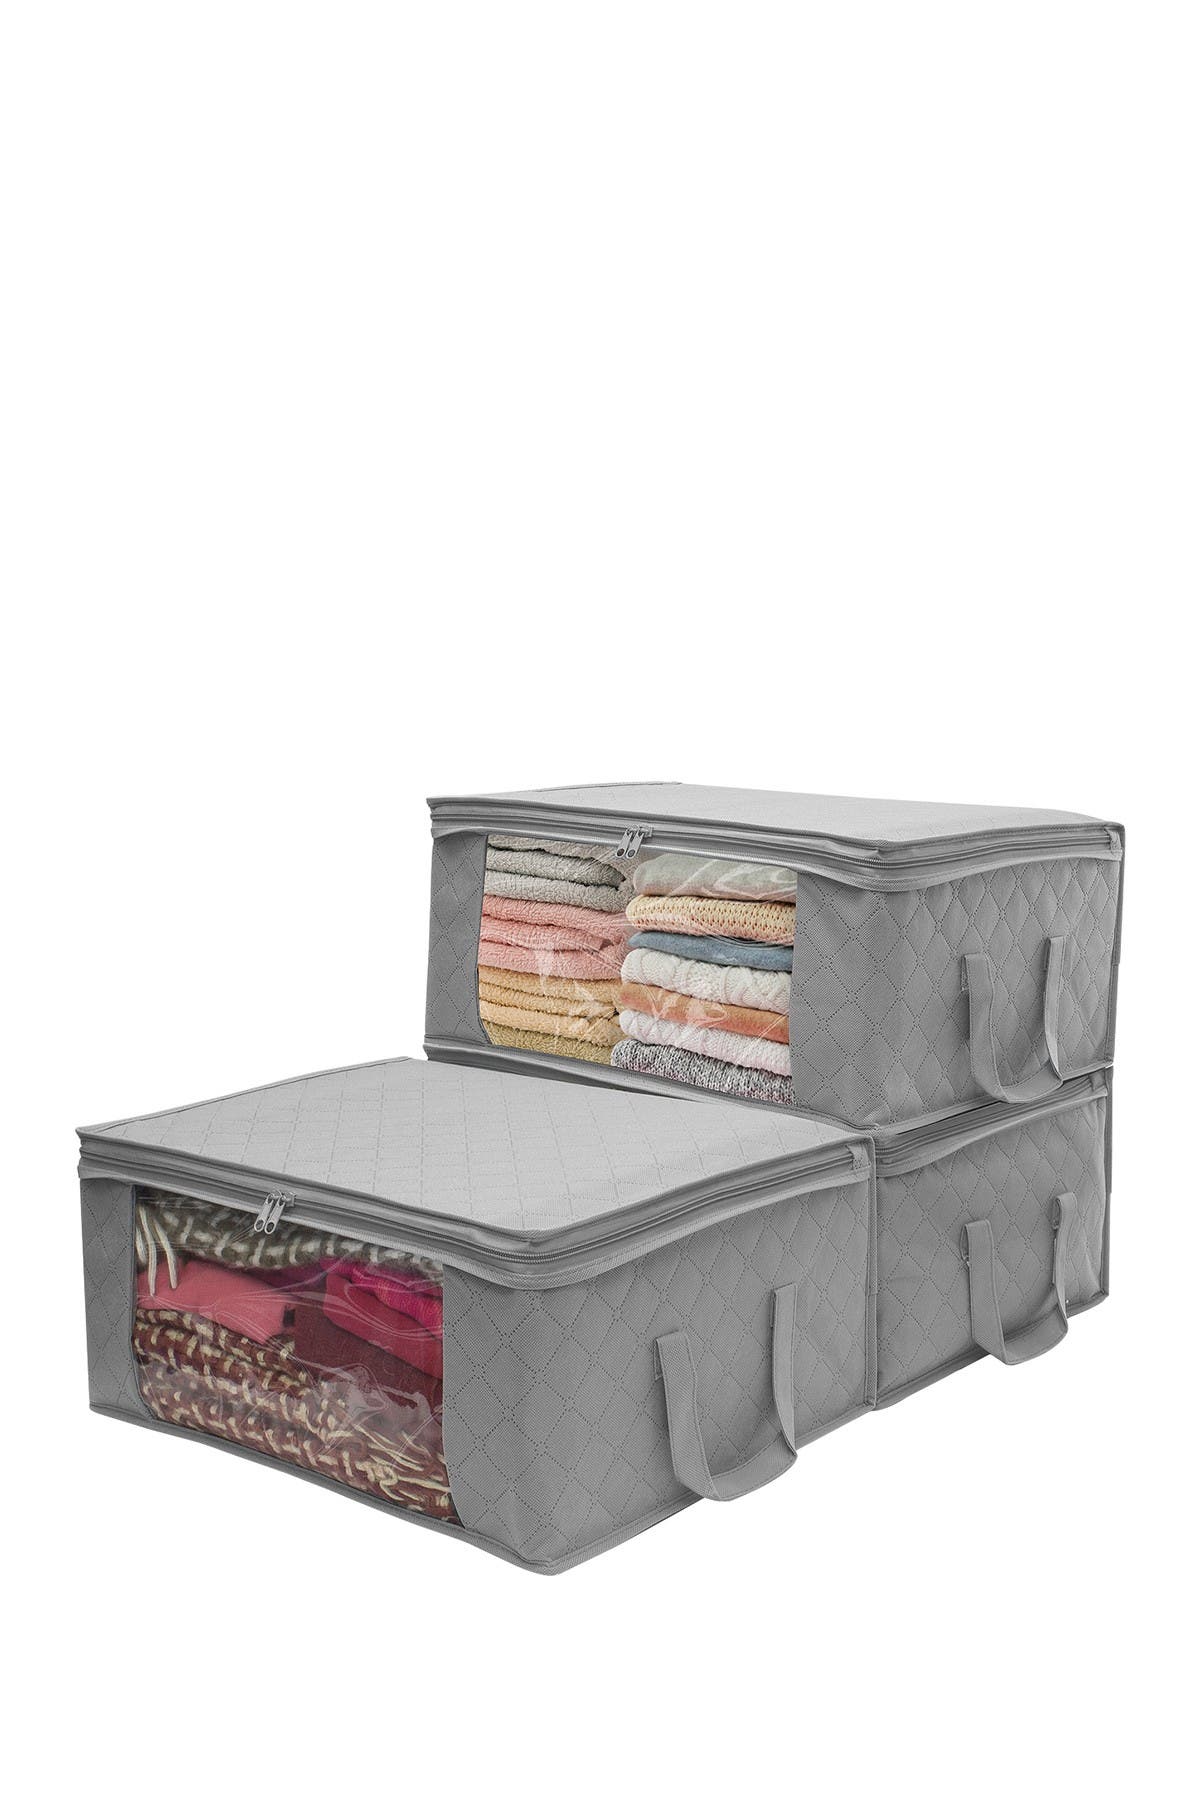 Sorbus Foldable Storage Bag Organizers 3 Sections Great for Clothes Blankets ...